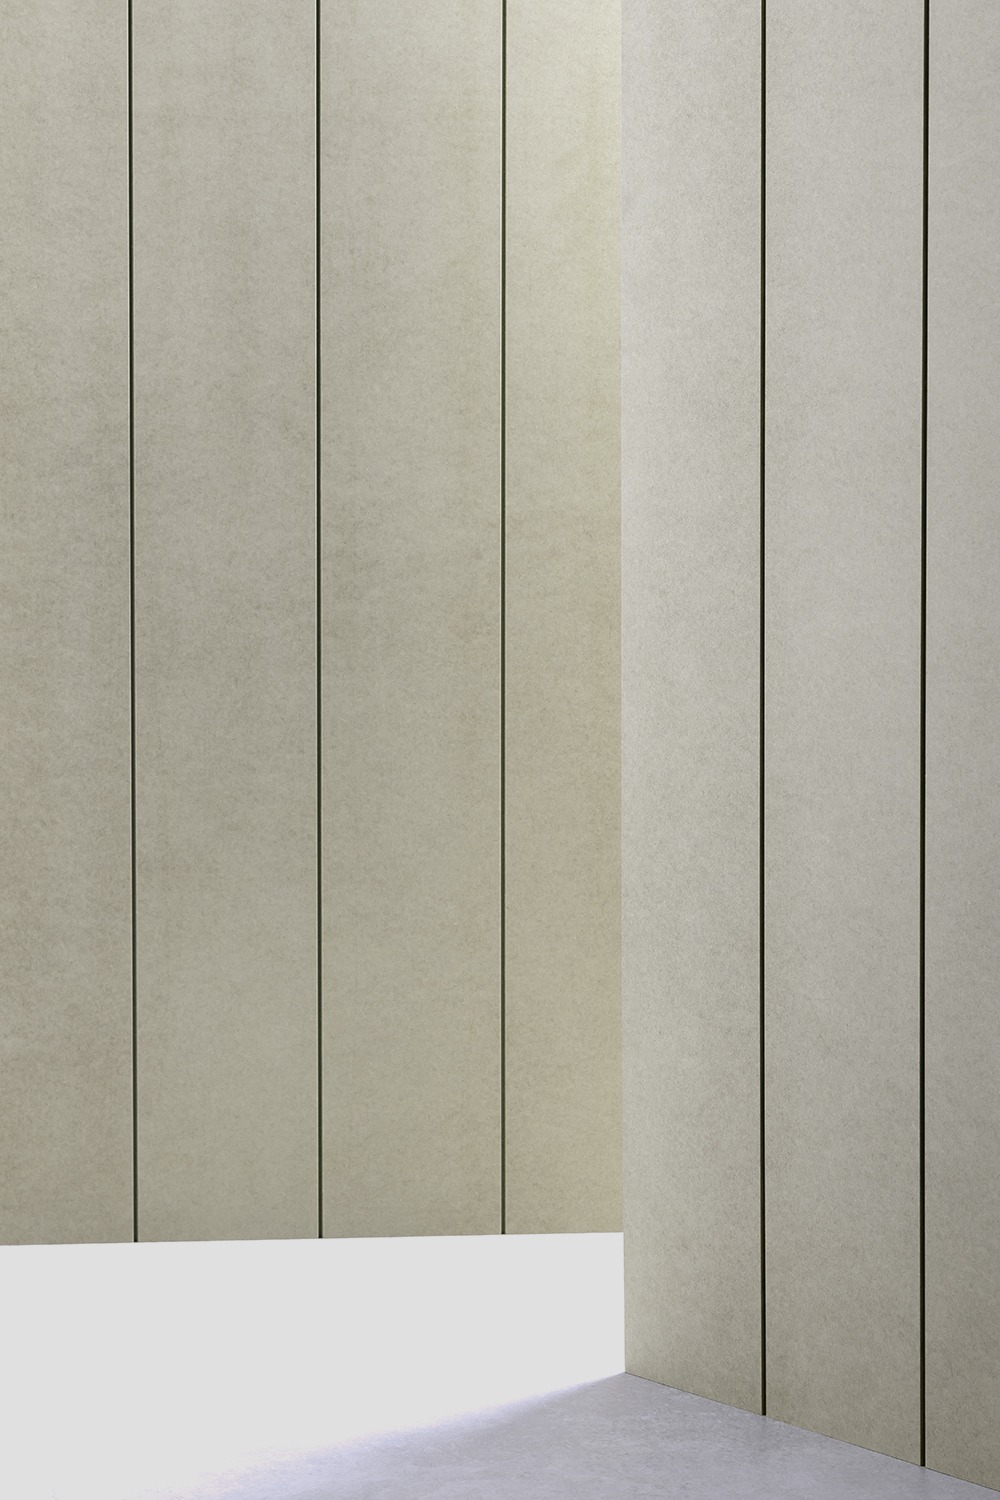 photo to show different variant of a 2.4m mdf tongue and groove panel 